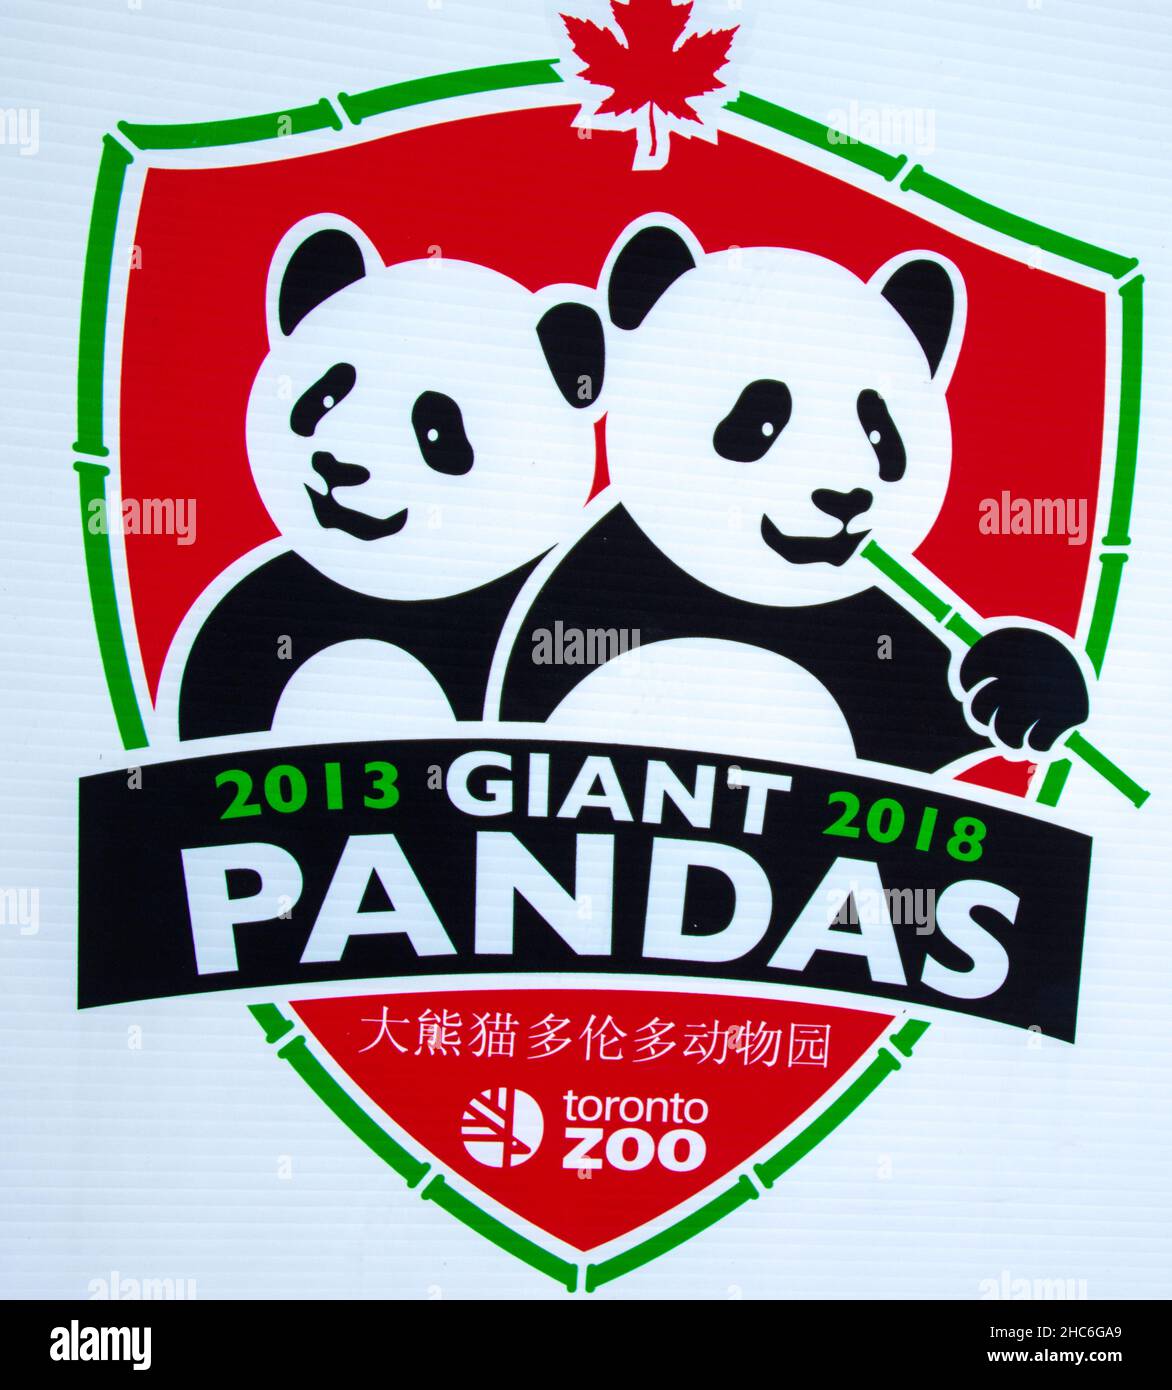 The design or logo for the Giant Panda Exhibition in Toronto Zoo which is currently the main attraction in the center, names of the panda bears are Er Stock Photo